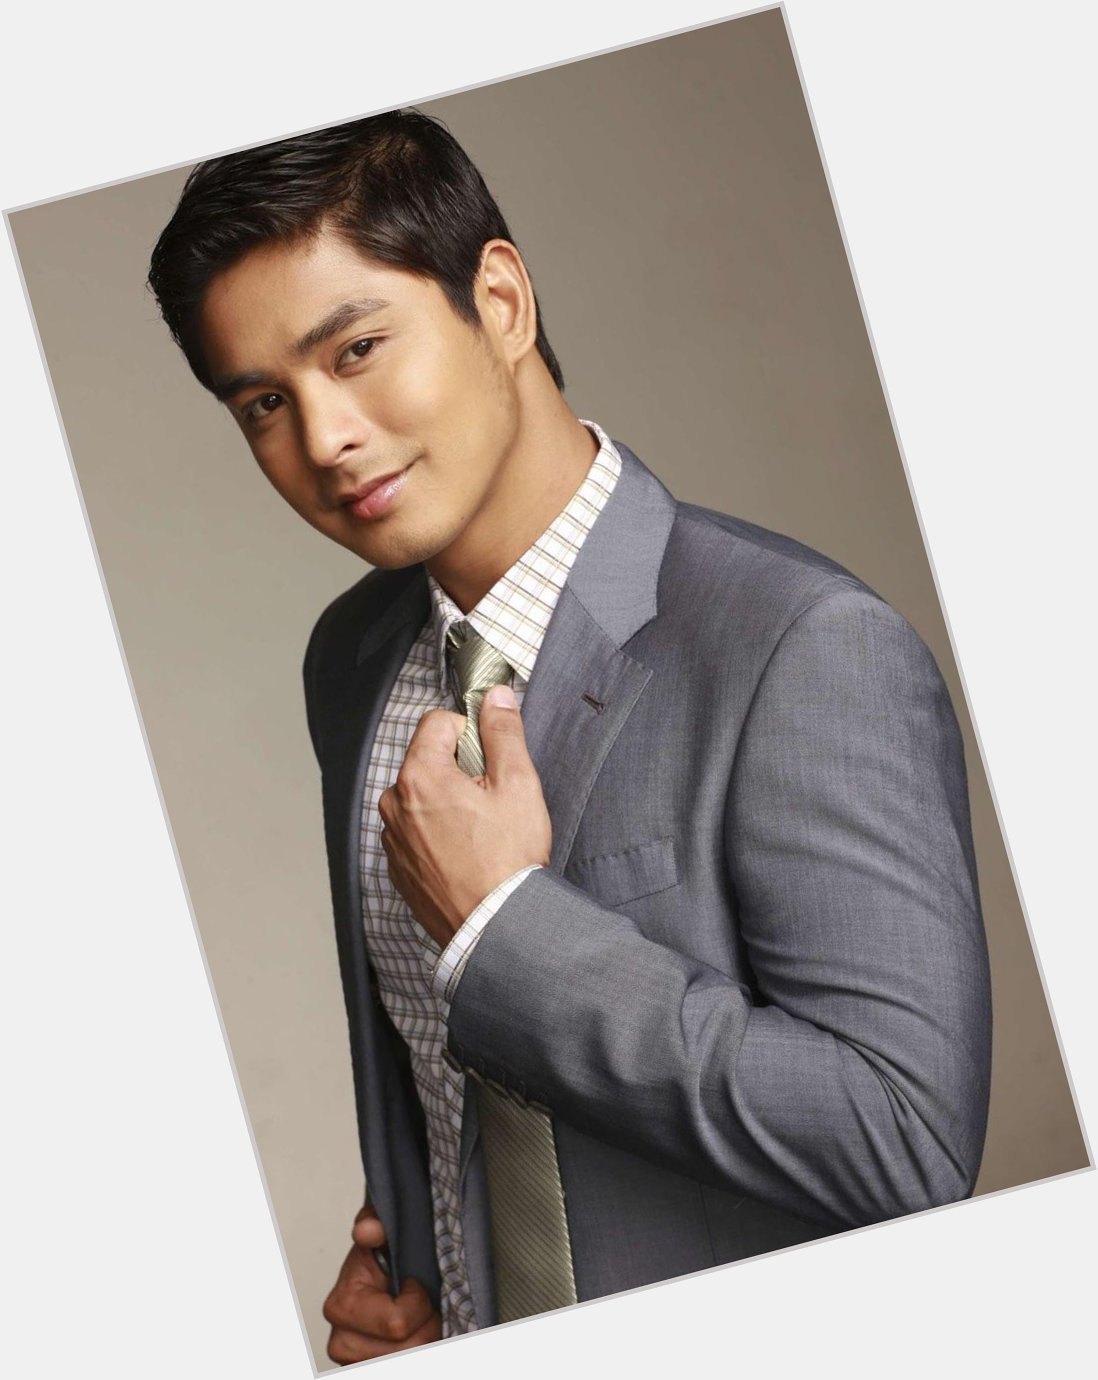 Happy Birthday & Happy Anniversary, Coco Martin! May you have more projects & more birthdays to come. :-) 